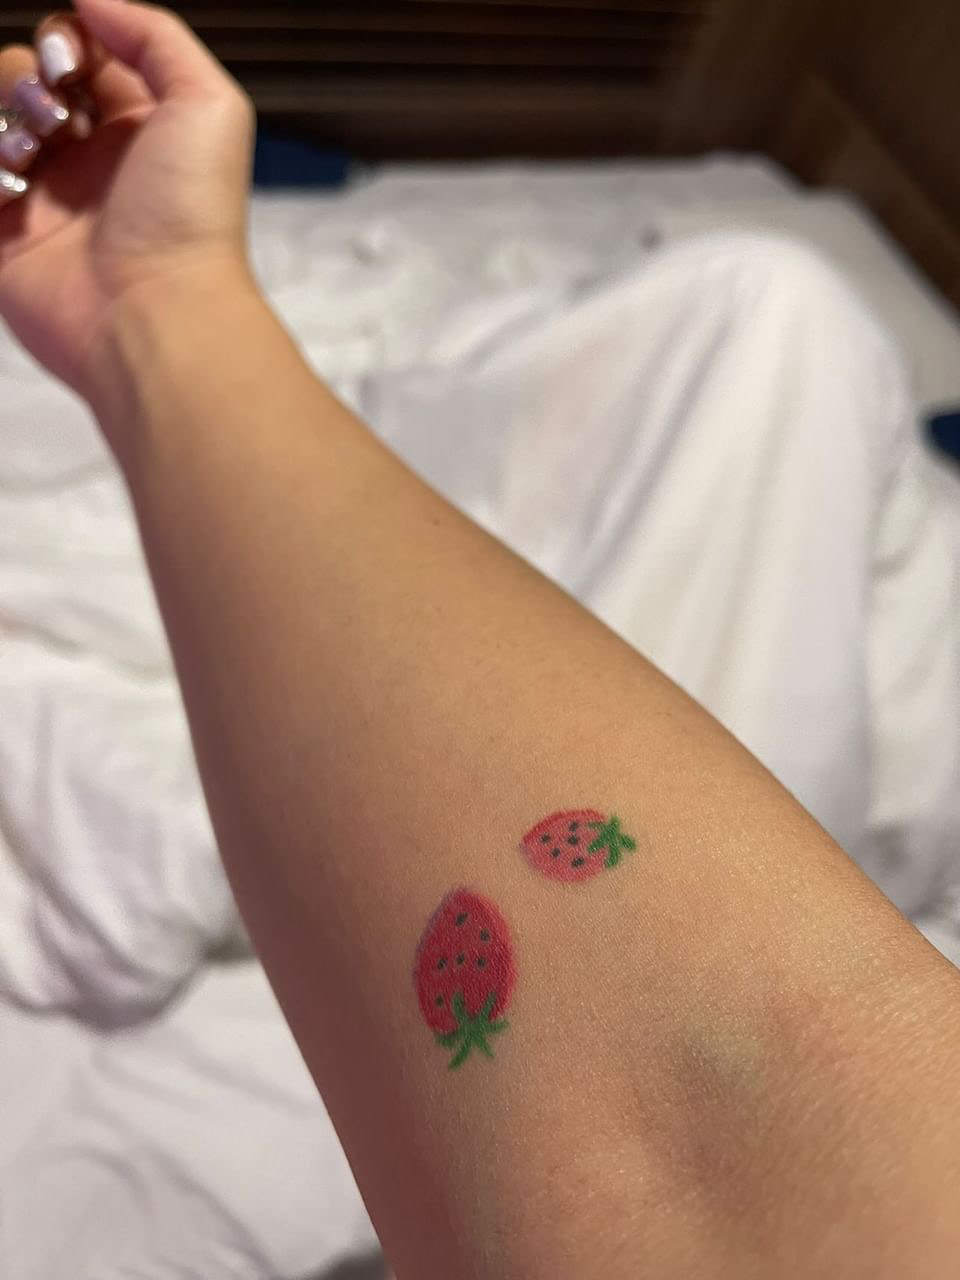 Tattoo Artist Develops Flower Roll Tattoos Specifically for Fat Bodies —  See Photos